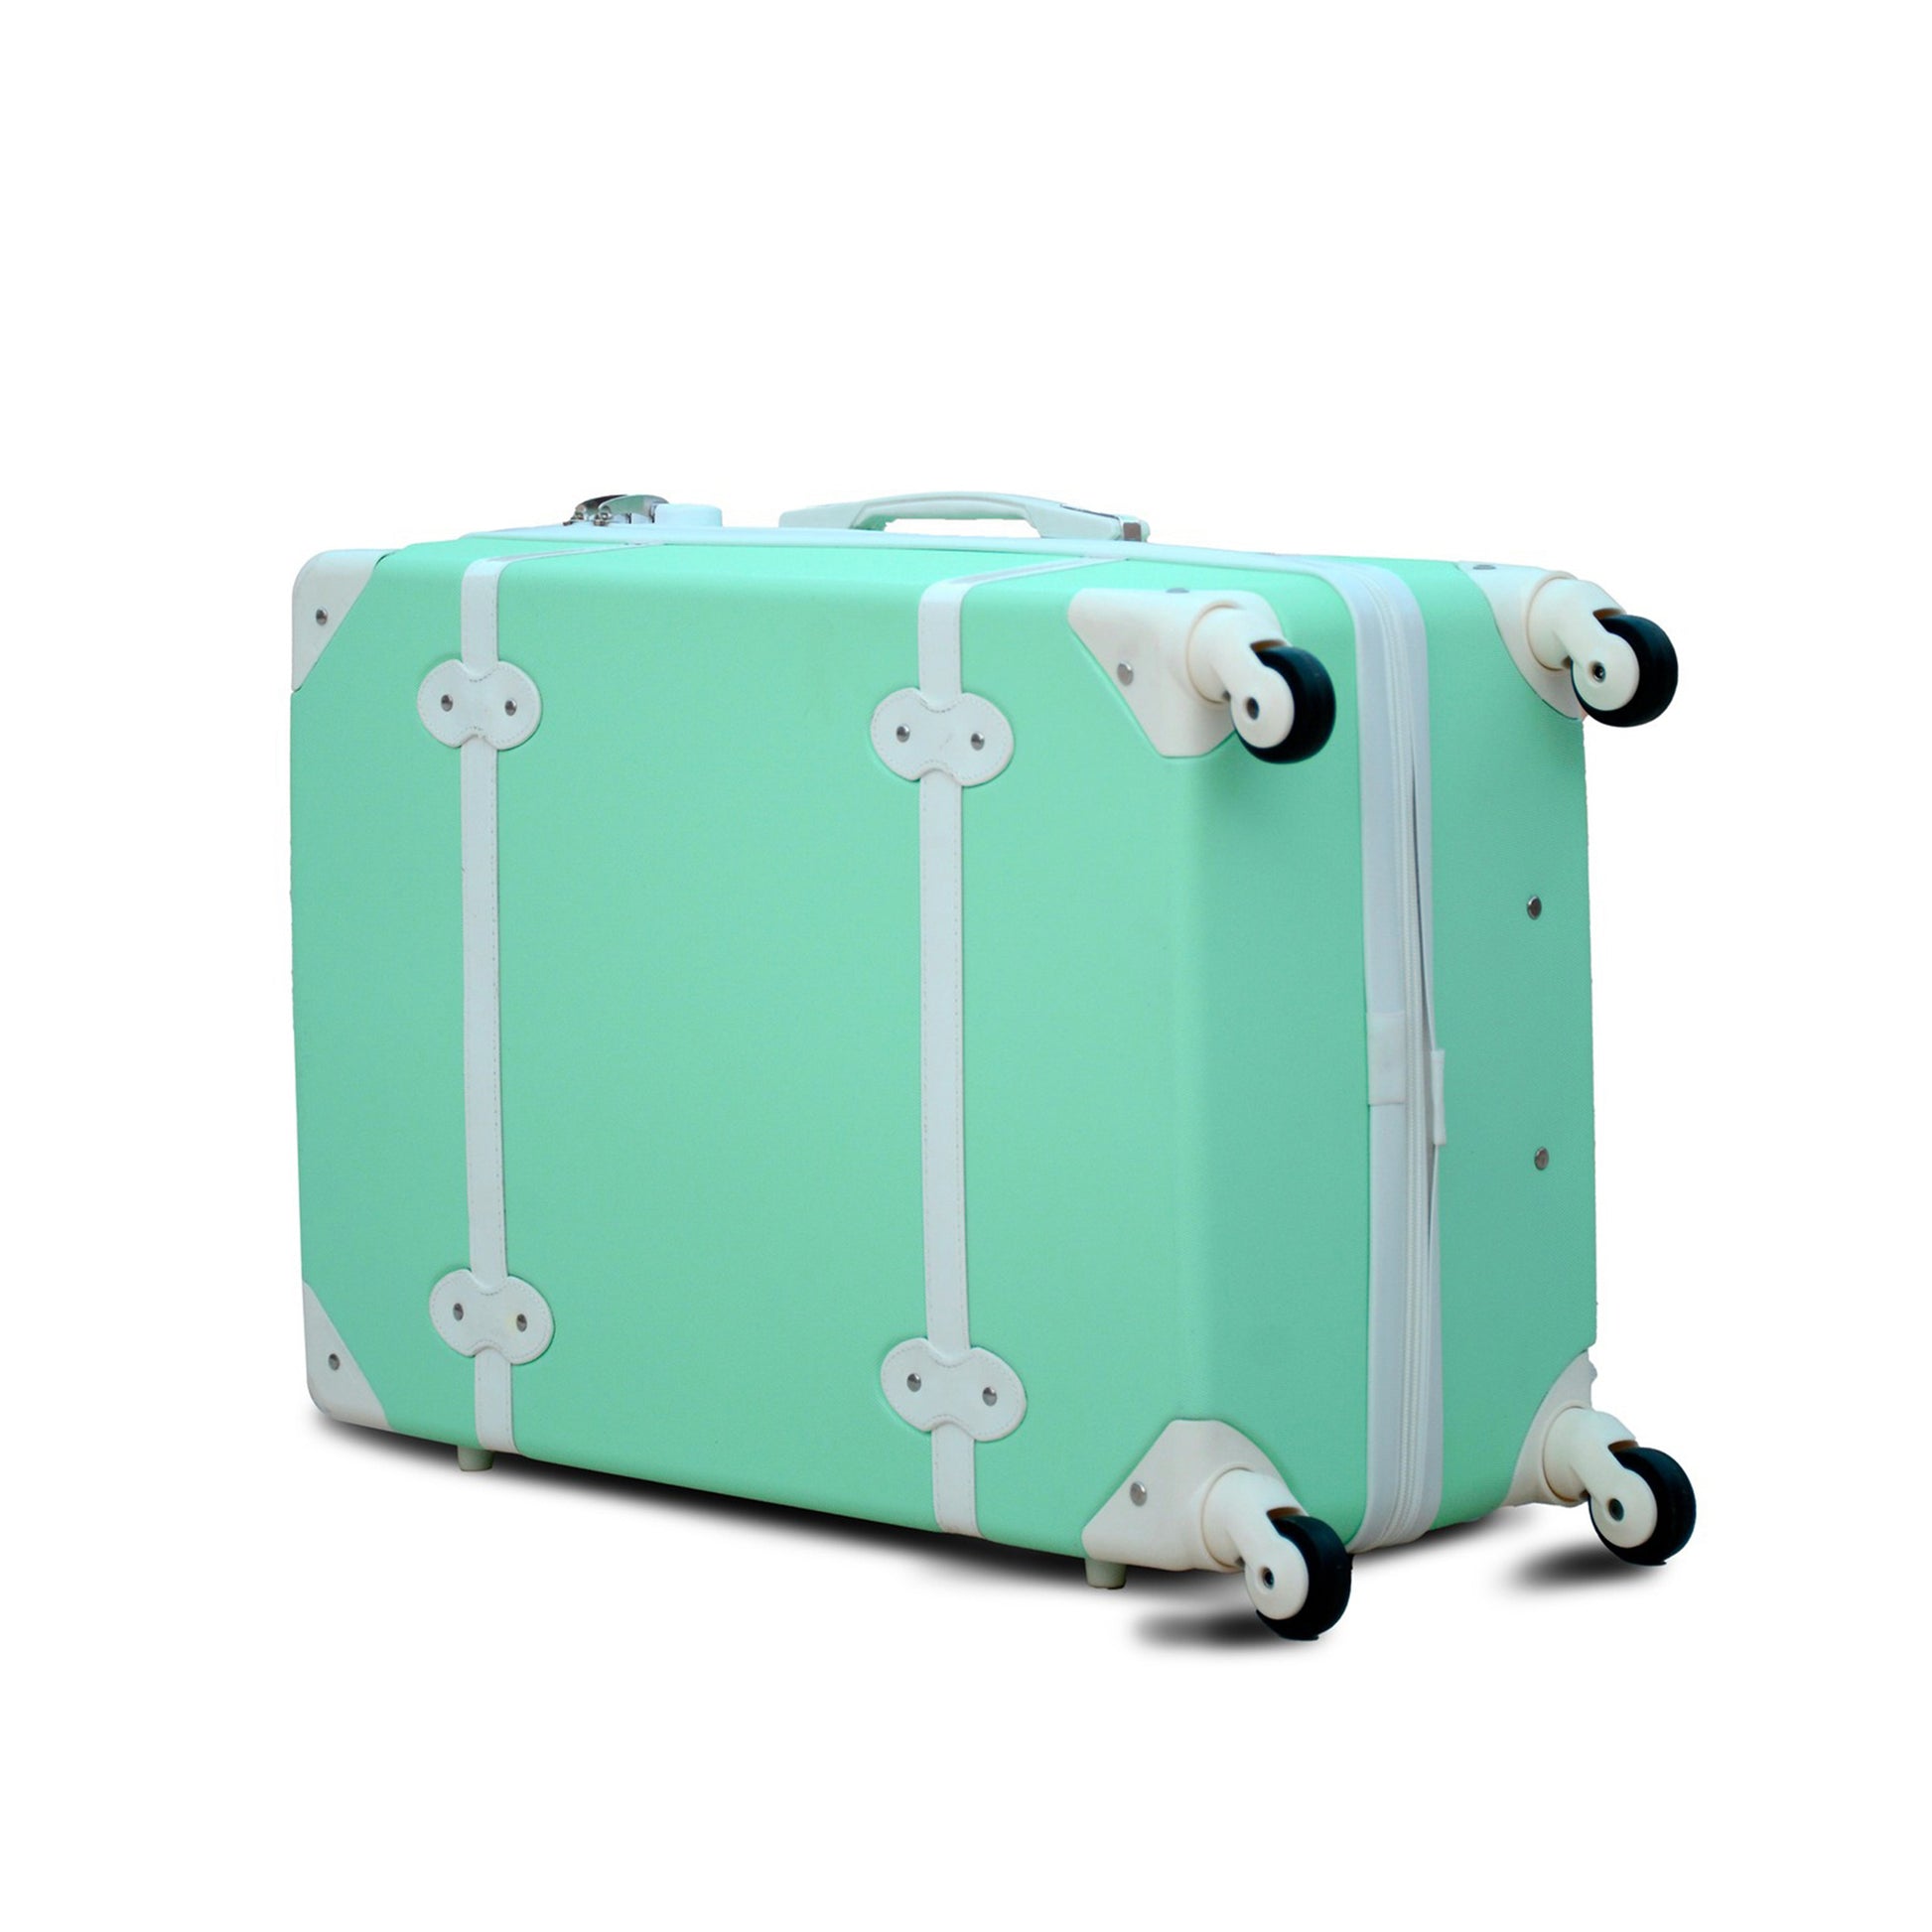 4 Pcs Full Set 7” 20” 24” 28 inches Corner Guard Green Lightweight ABS Luggage zaappy